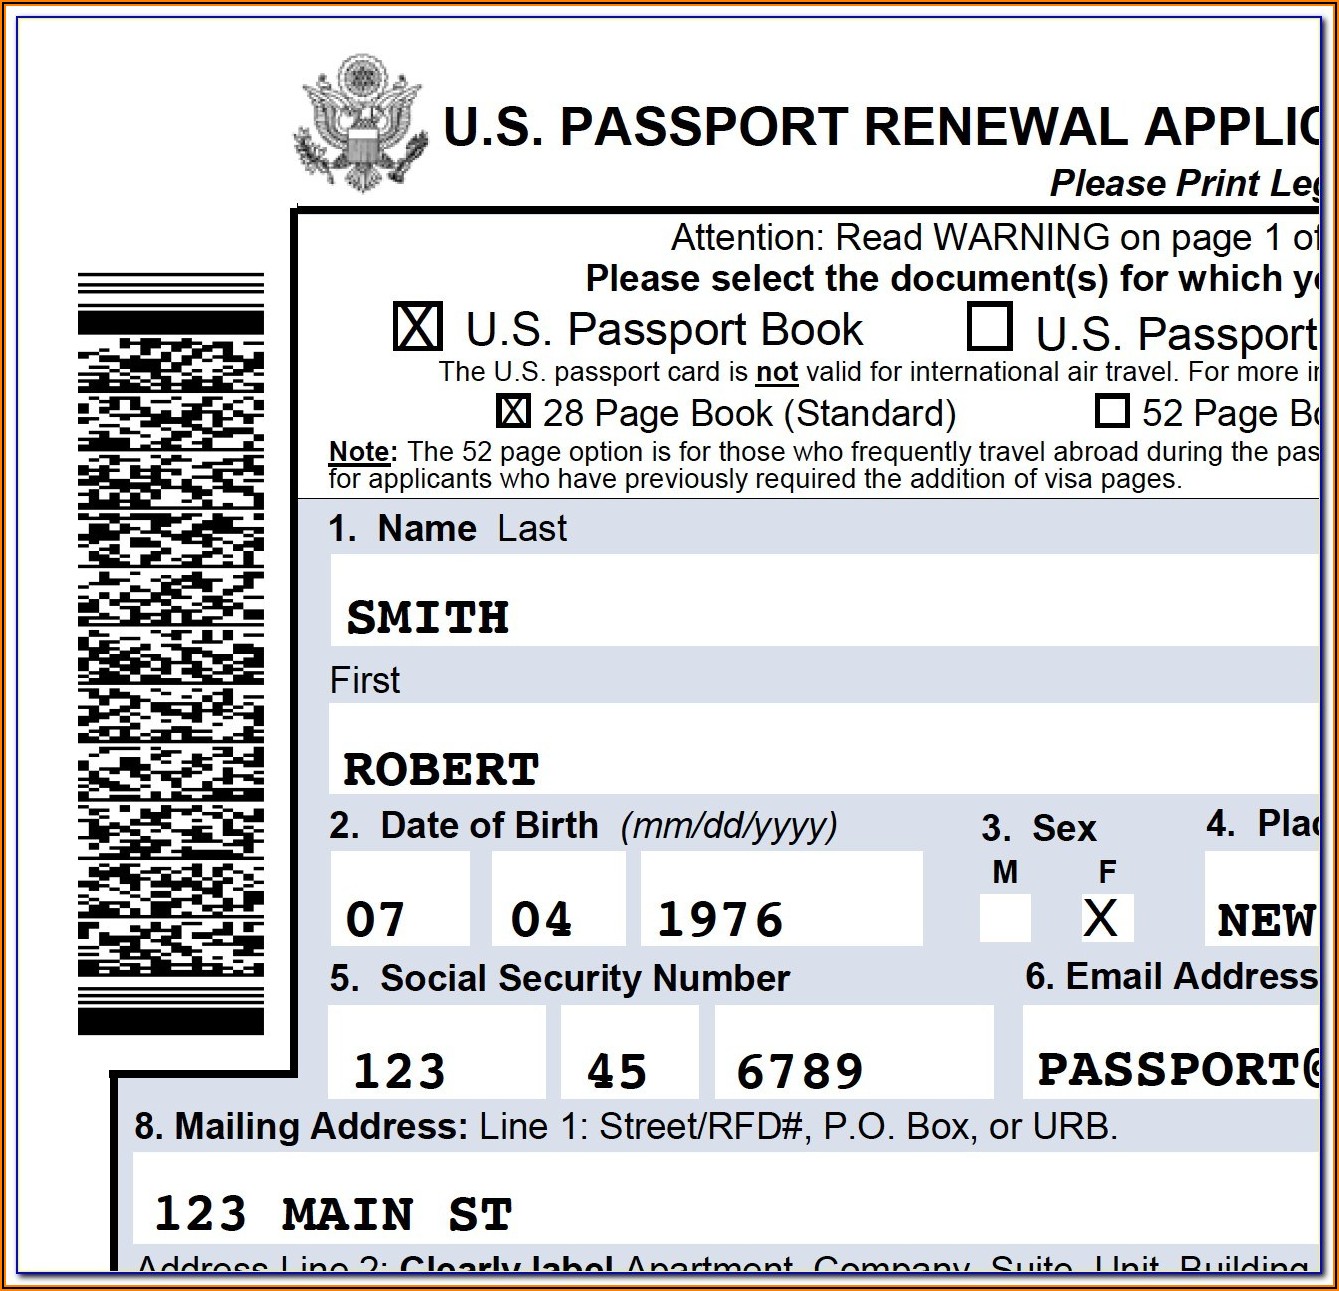 Application Form For Passport Renewal Philippines